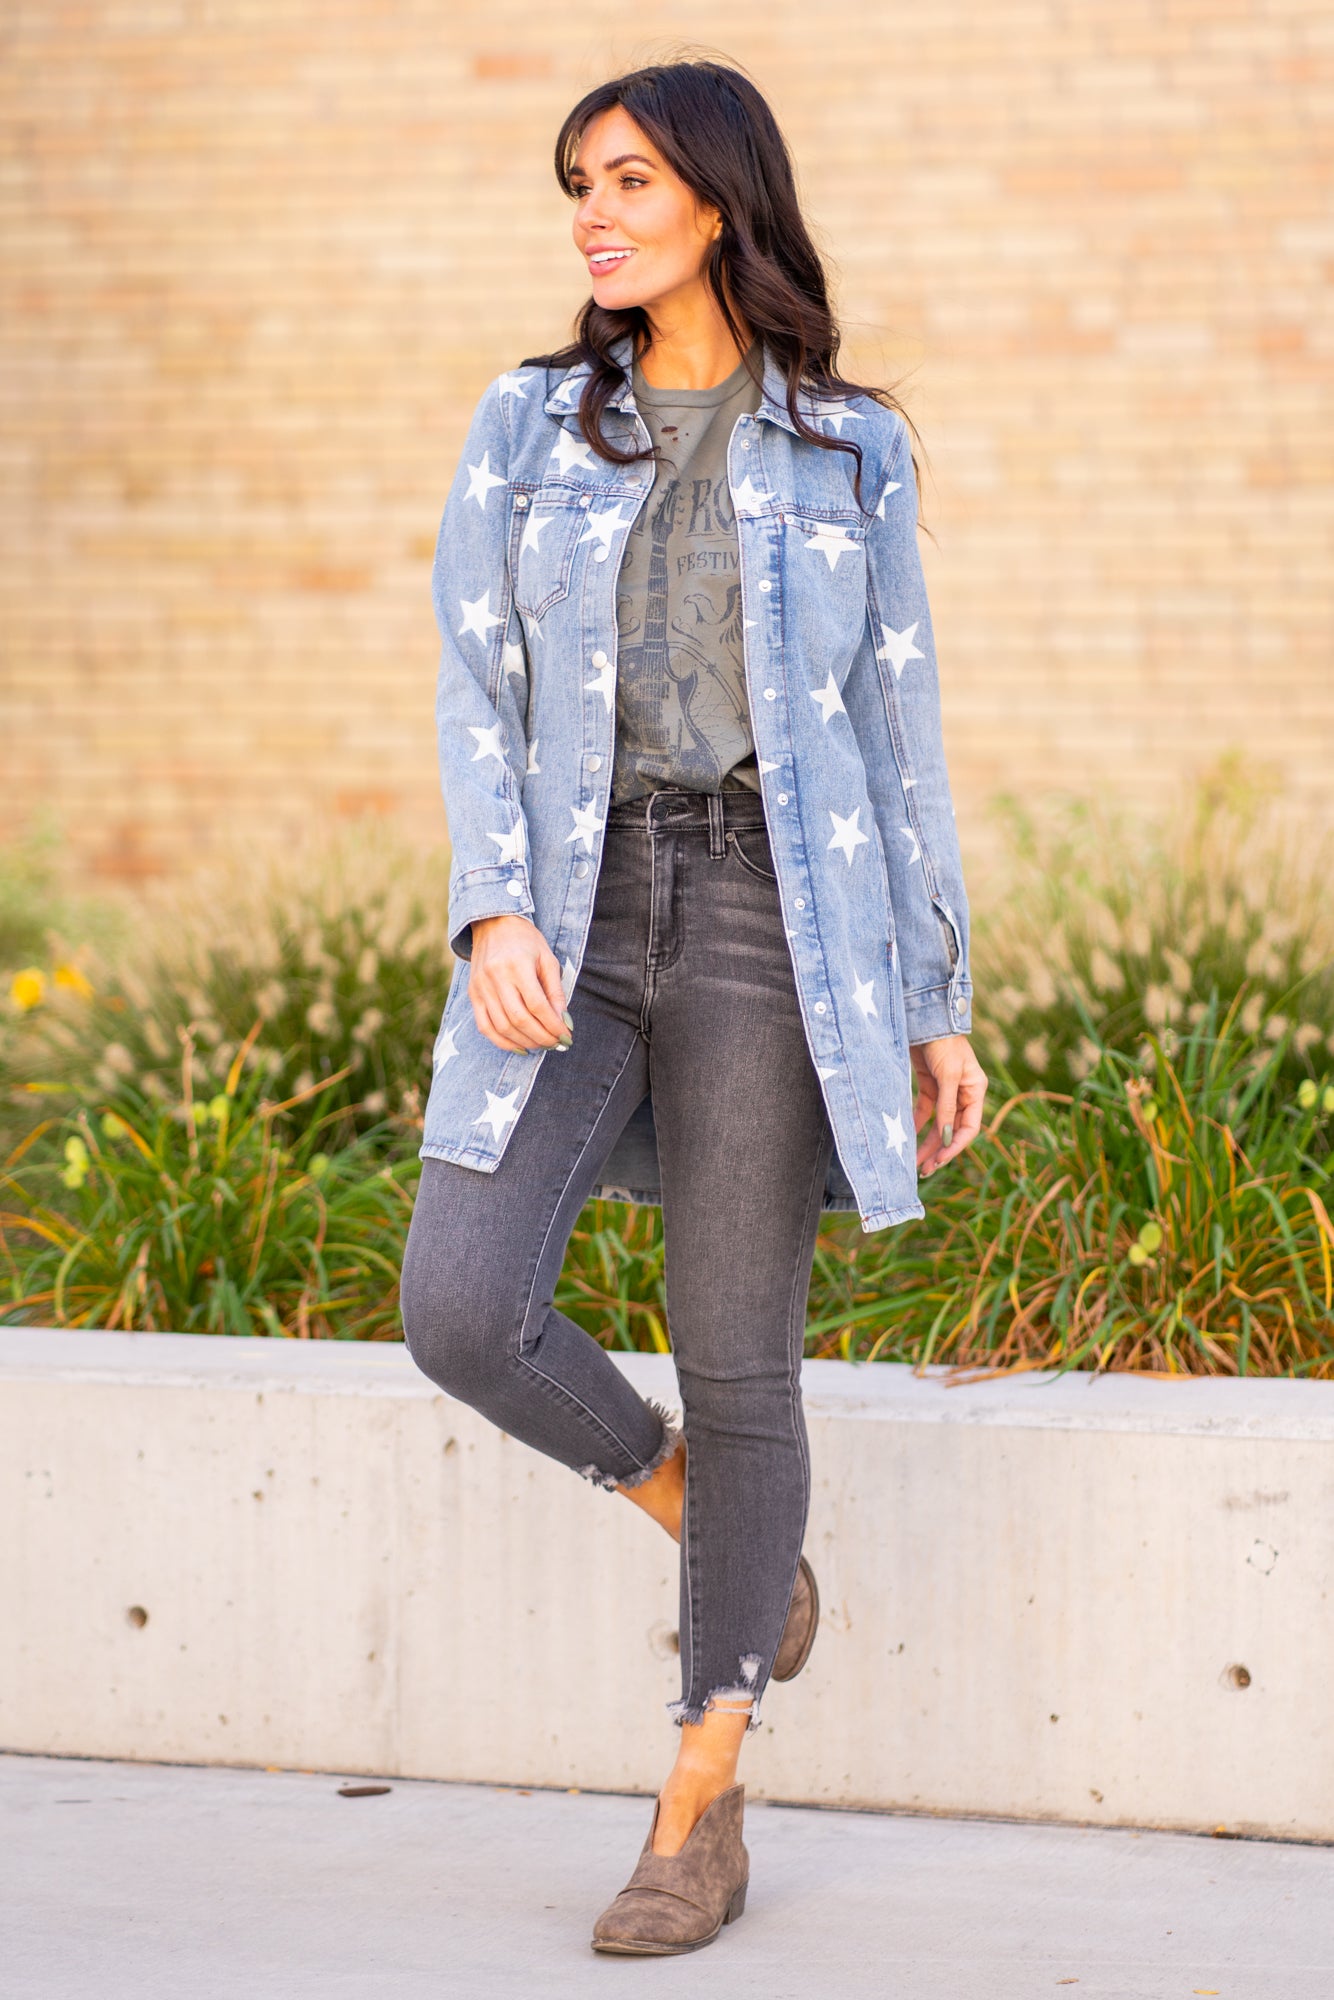 Crop Top With Long Shrug Jacket – StyleAsh